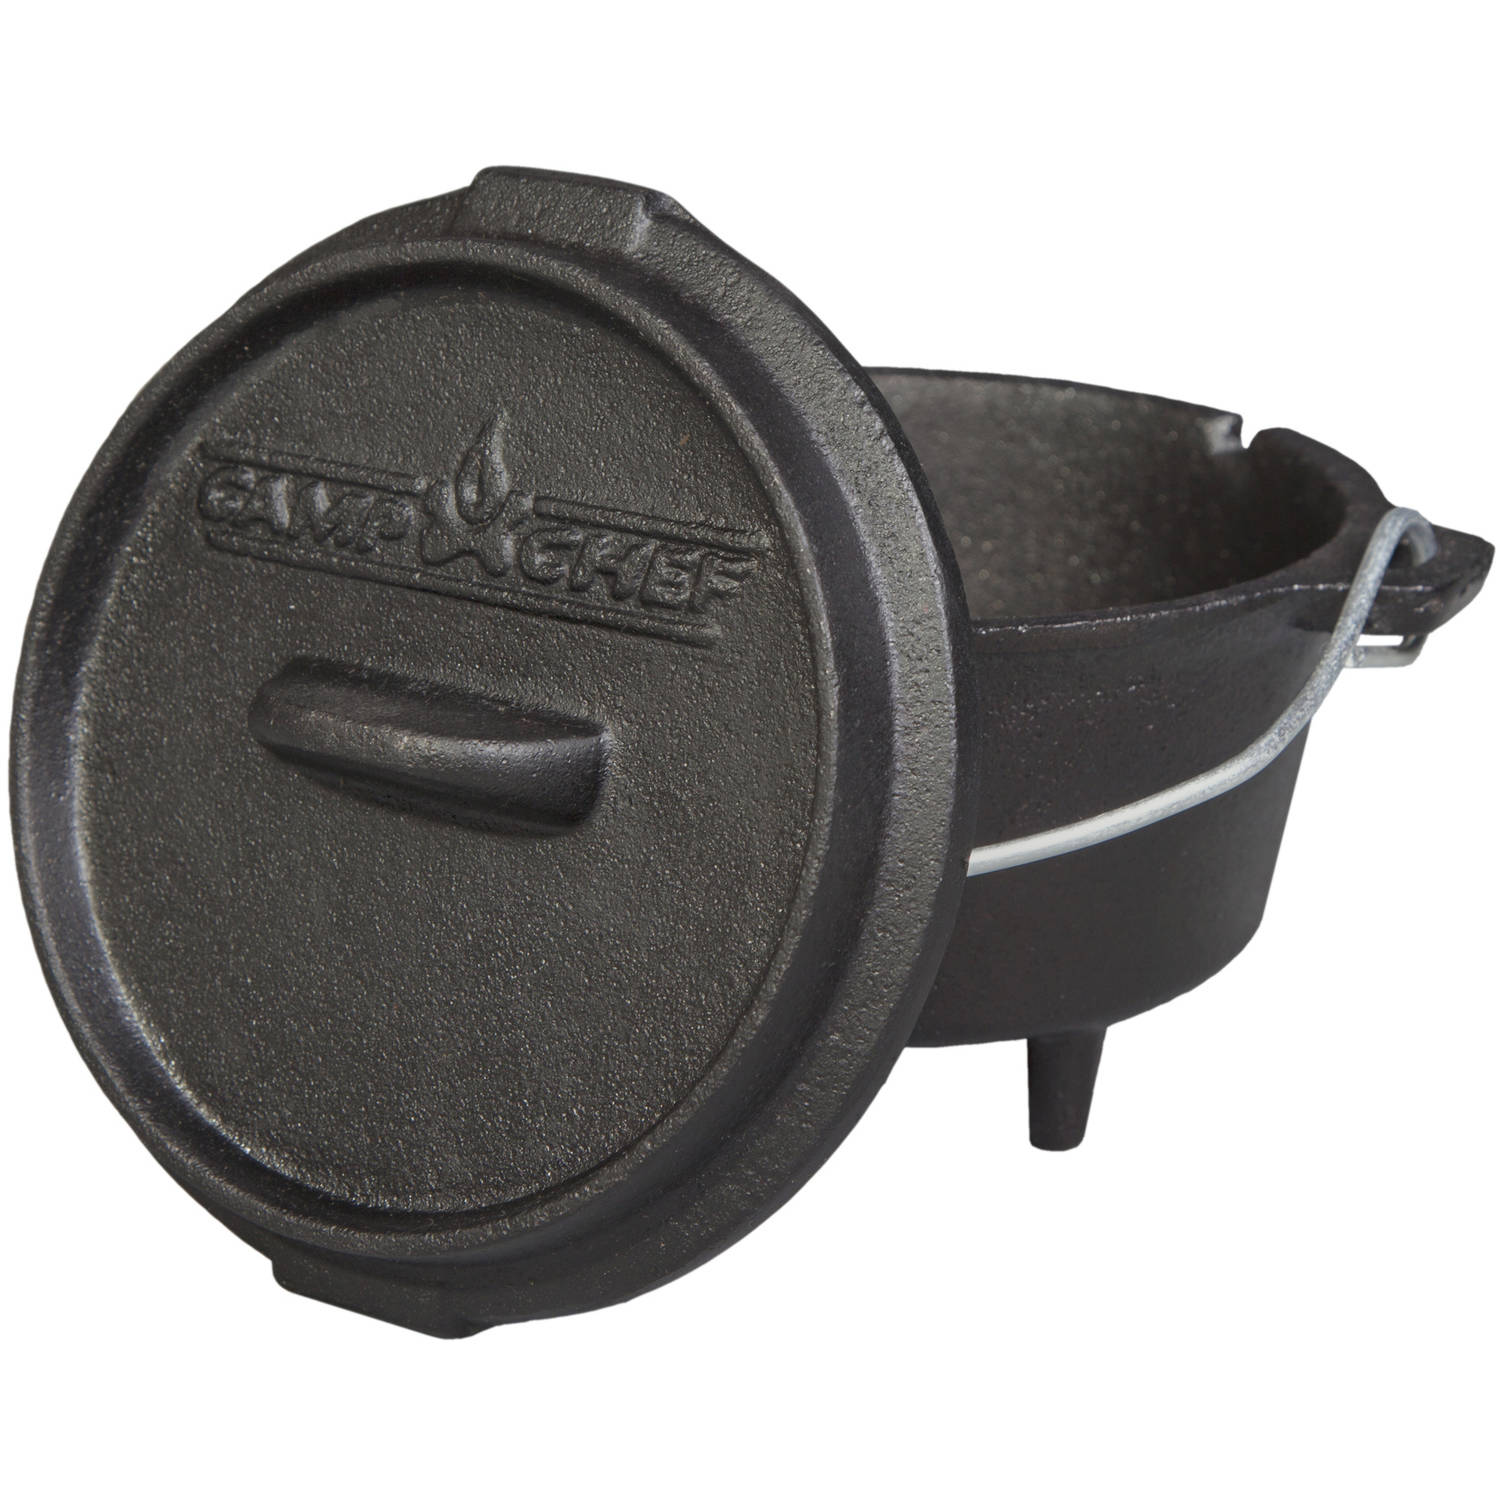 Camp Chef Deluxe Seasoned Cast Iron Dutch Oven - image 1 of 5